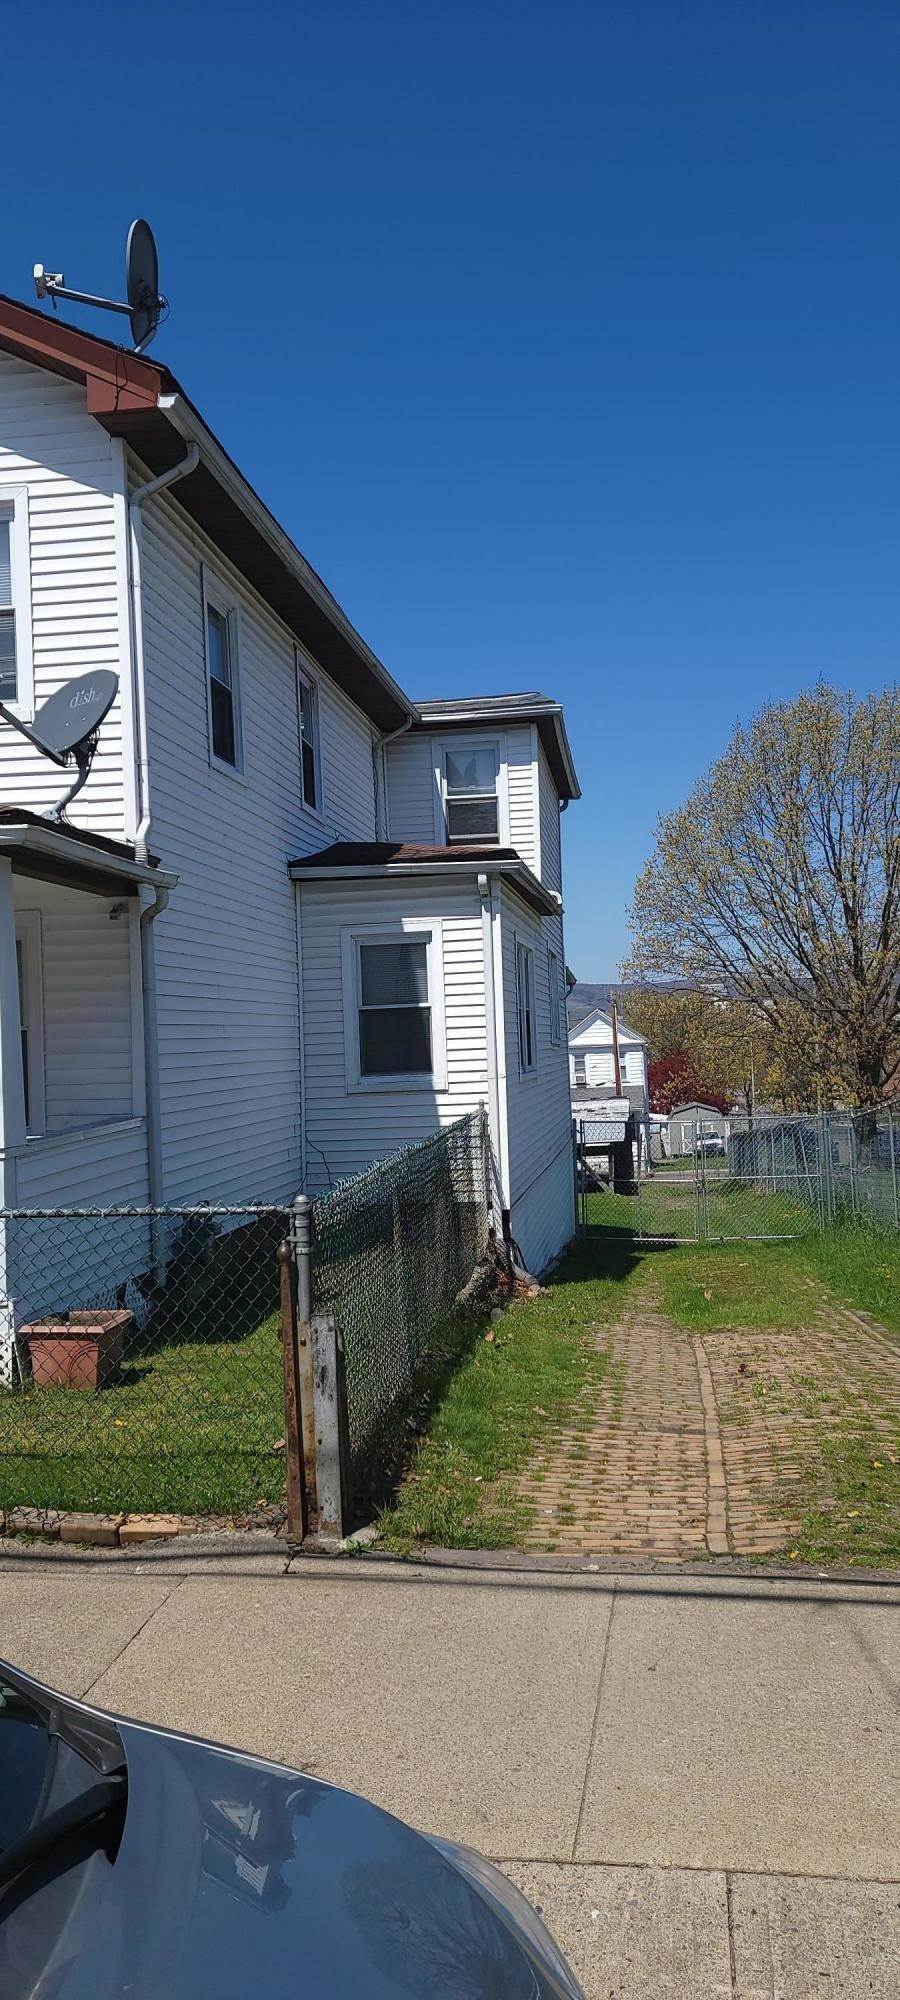 16. Single Family Homes for Sale at 23 S Meade St Wilkes Barre, Pennsylvania 18702 United States